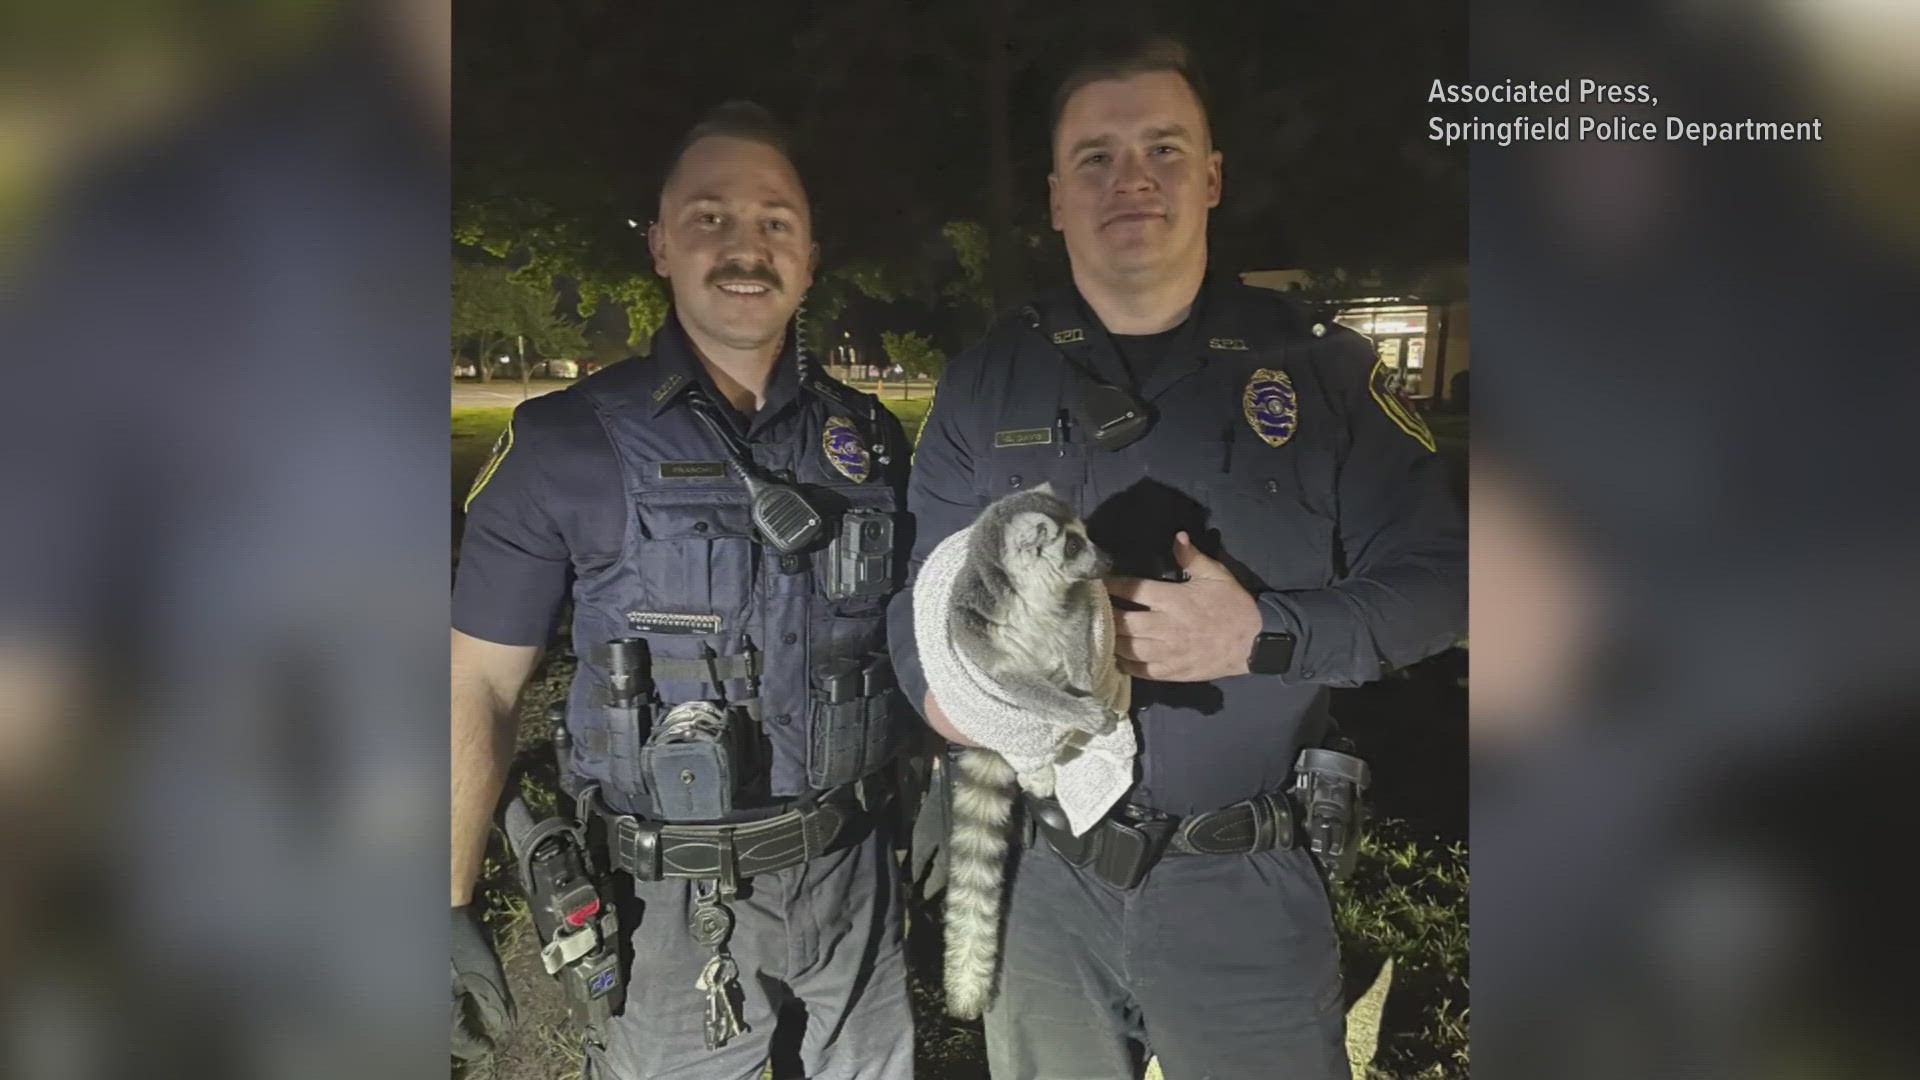 Bodycam video shows the two officers' attempts to nab the speedy little primate, which made a dash for freedom Tuesday in Springfield, Missouri.